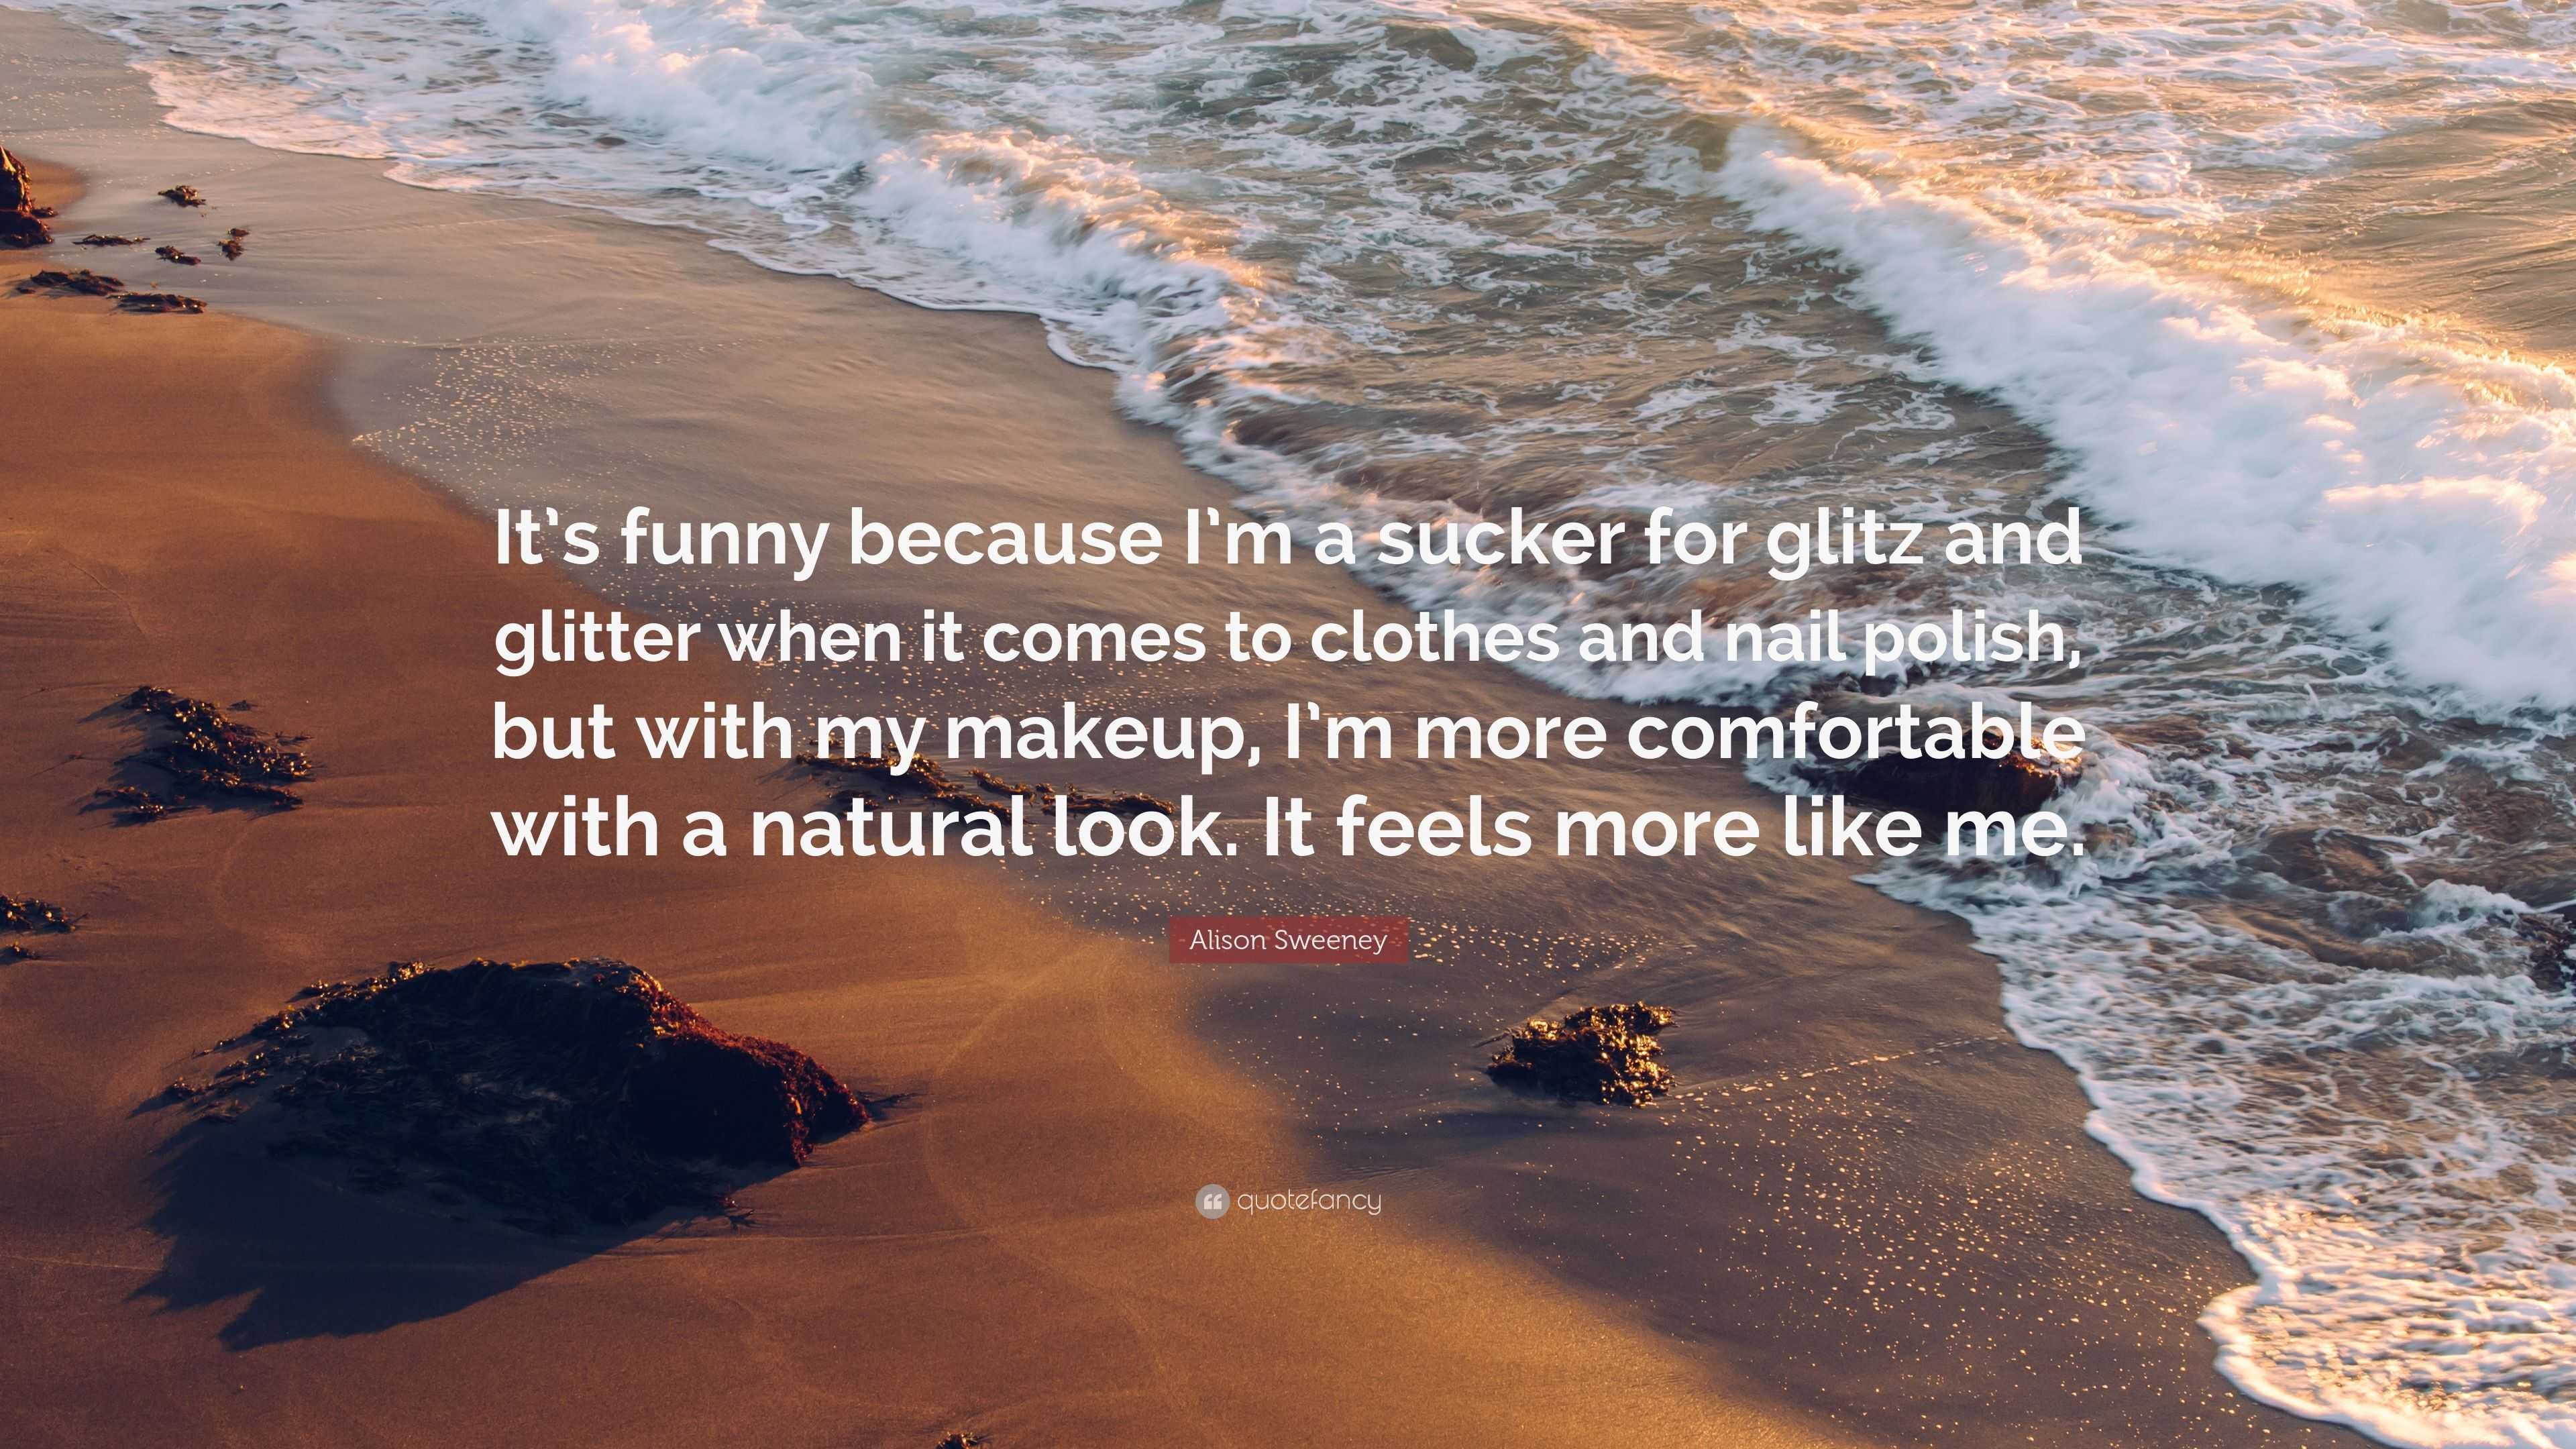 Alison Sweeney Quote: “It's funny because I'm a sucker for glitz and  glitter when it comes to clothes and nail polish, but with my makeup, I'm  ...”